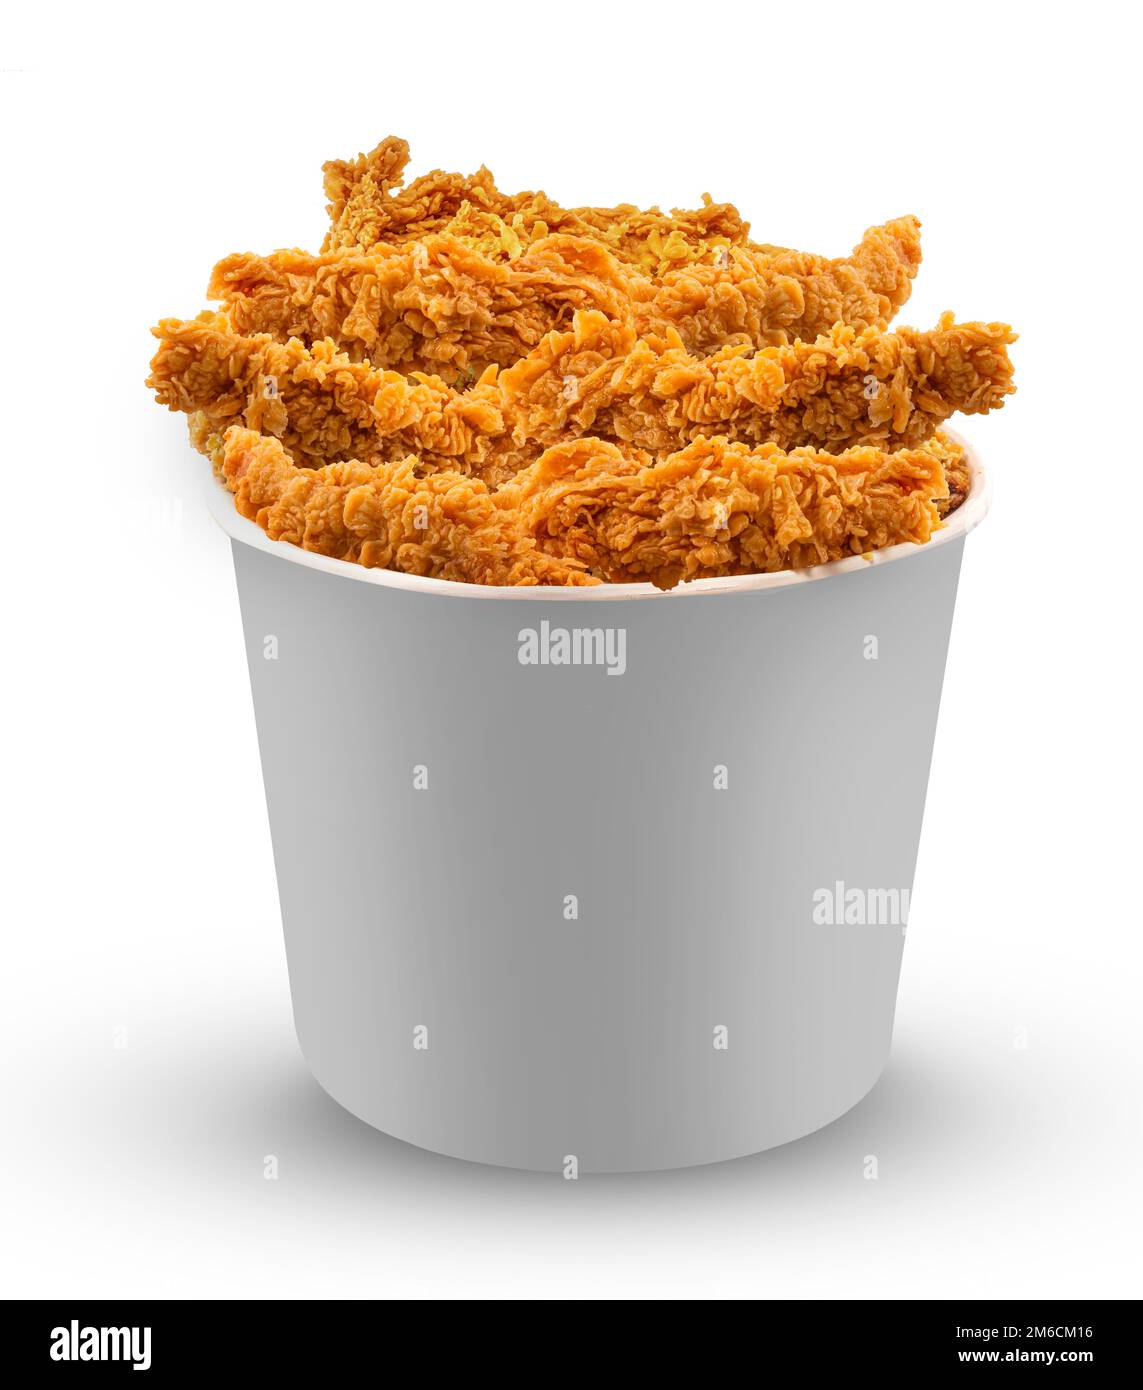 Fried Chicken hot crispy strips crunchy pieces Bucket - large box isolated on white background Stock Photo